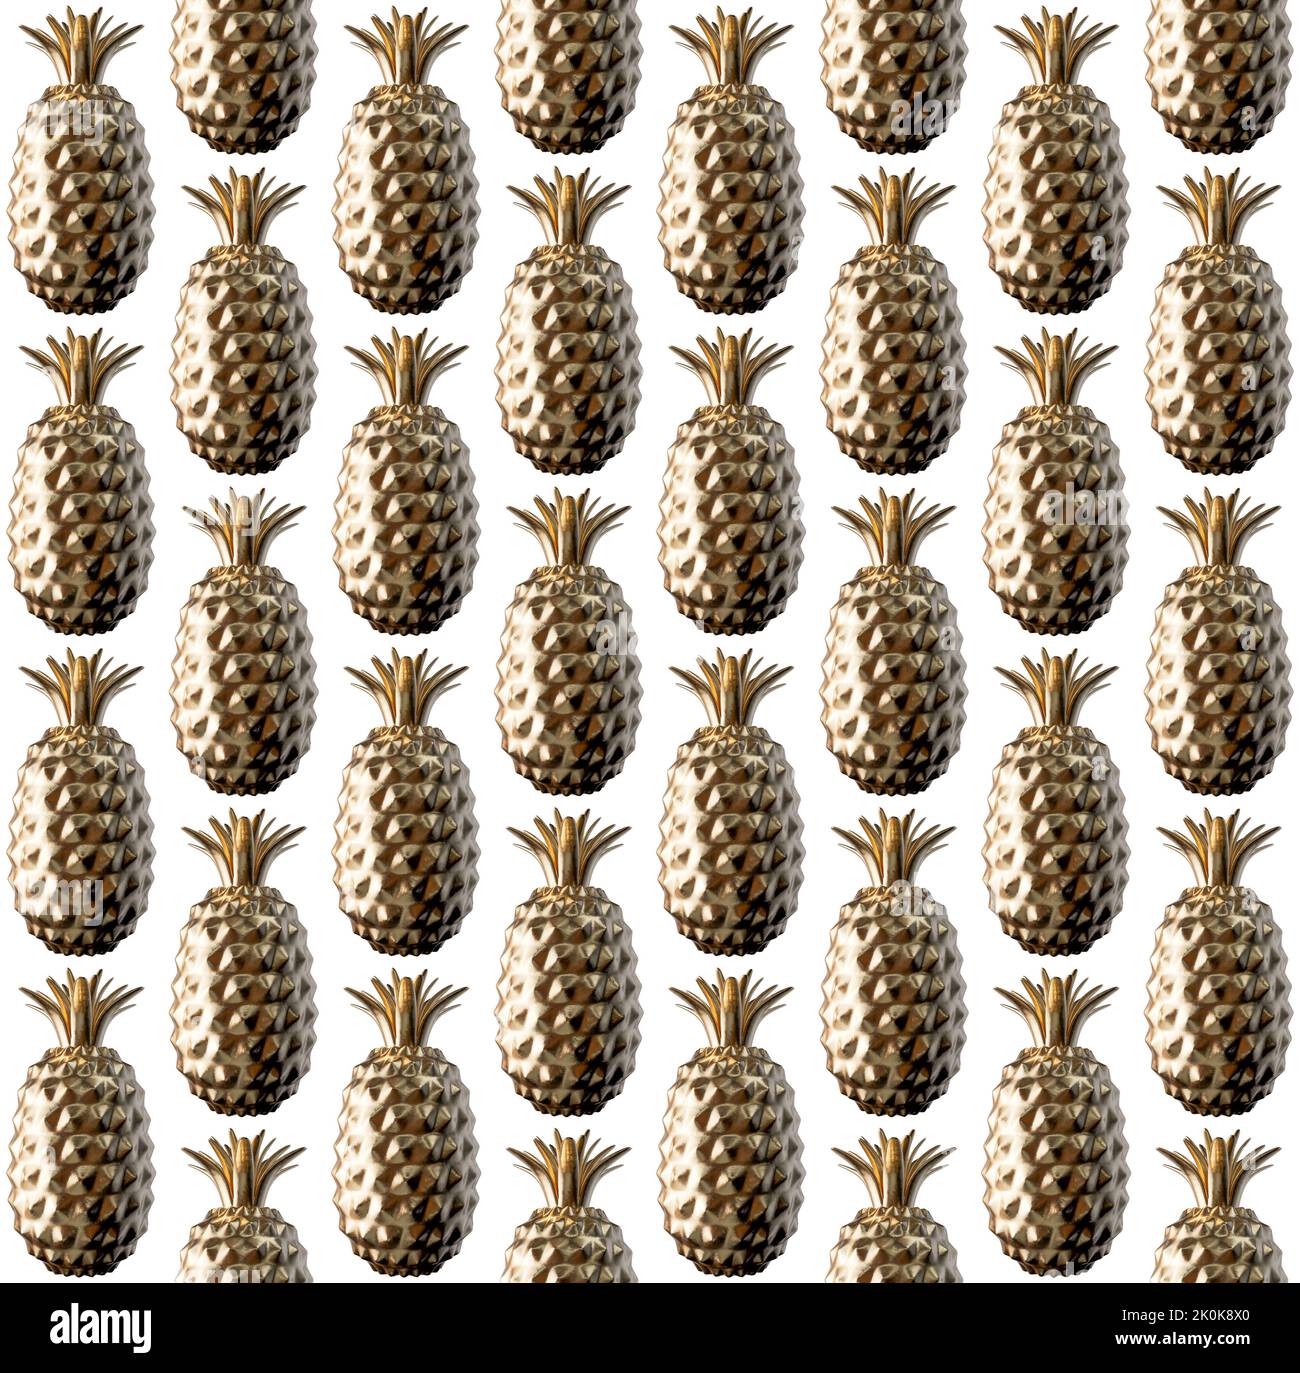 A seamless pattern of pineapples made from solid gold on an isolated background - 3D render Stock Photo